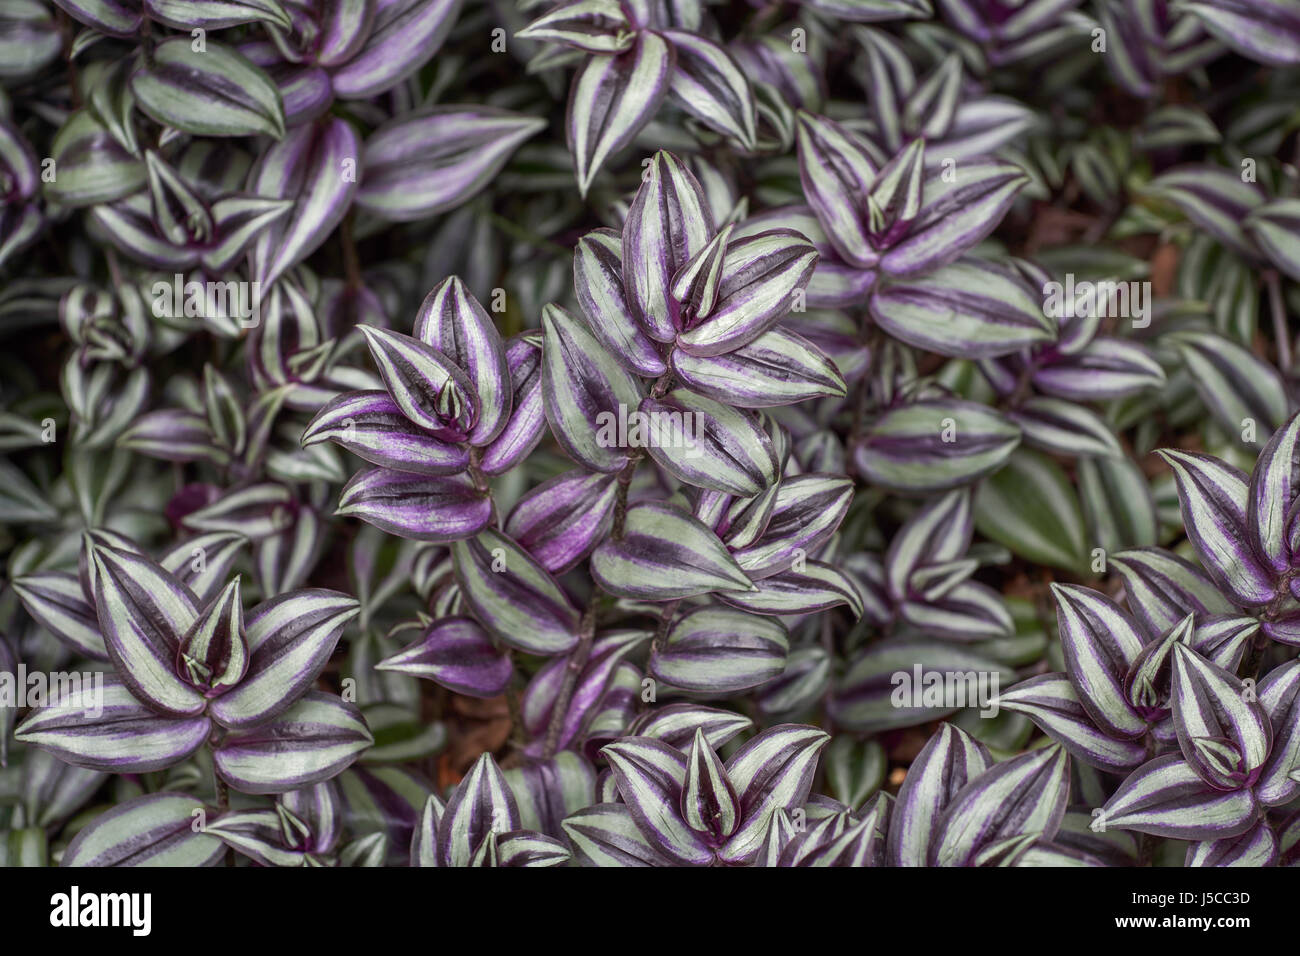 Exotic cover of variegated wandering jew plants (Tradescantia zebrina or inch plant) Stock Photo